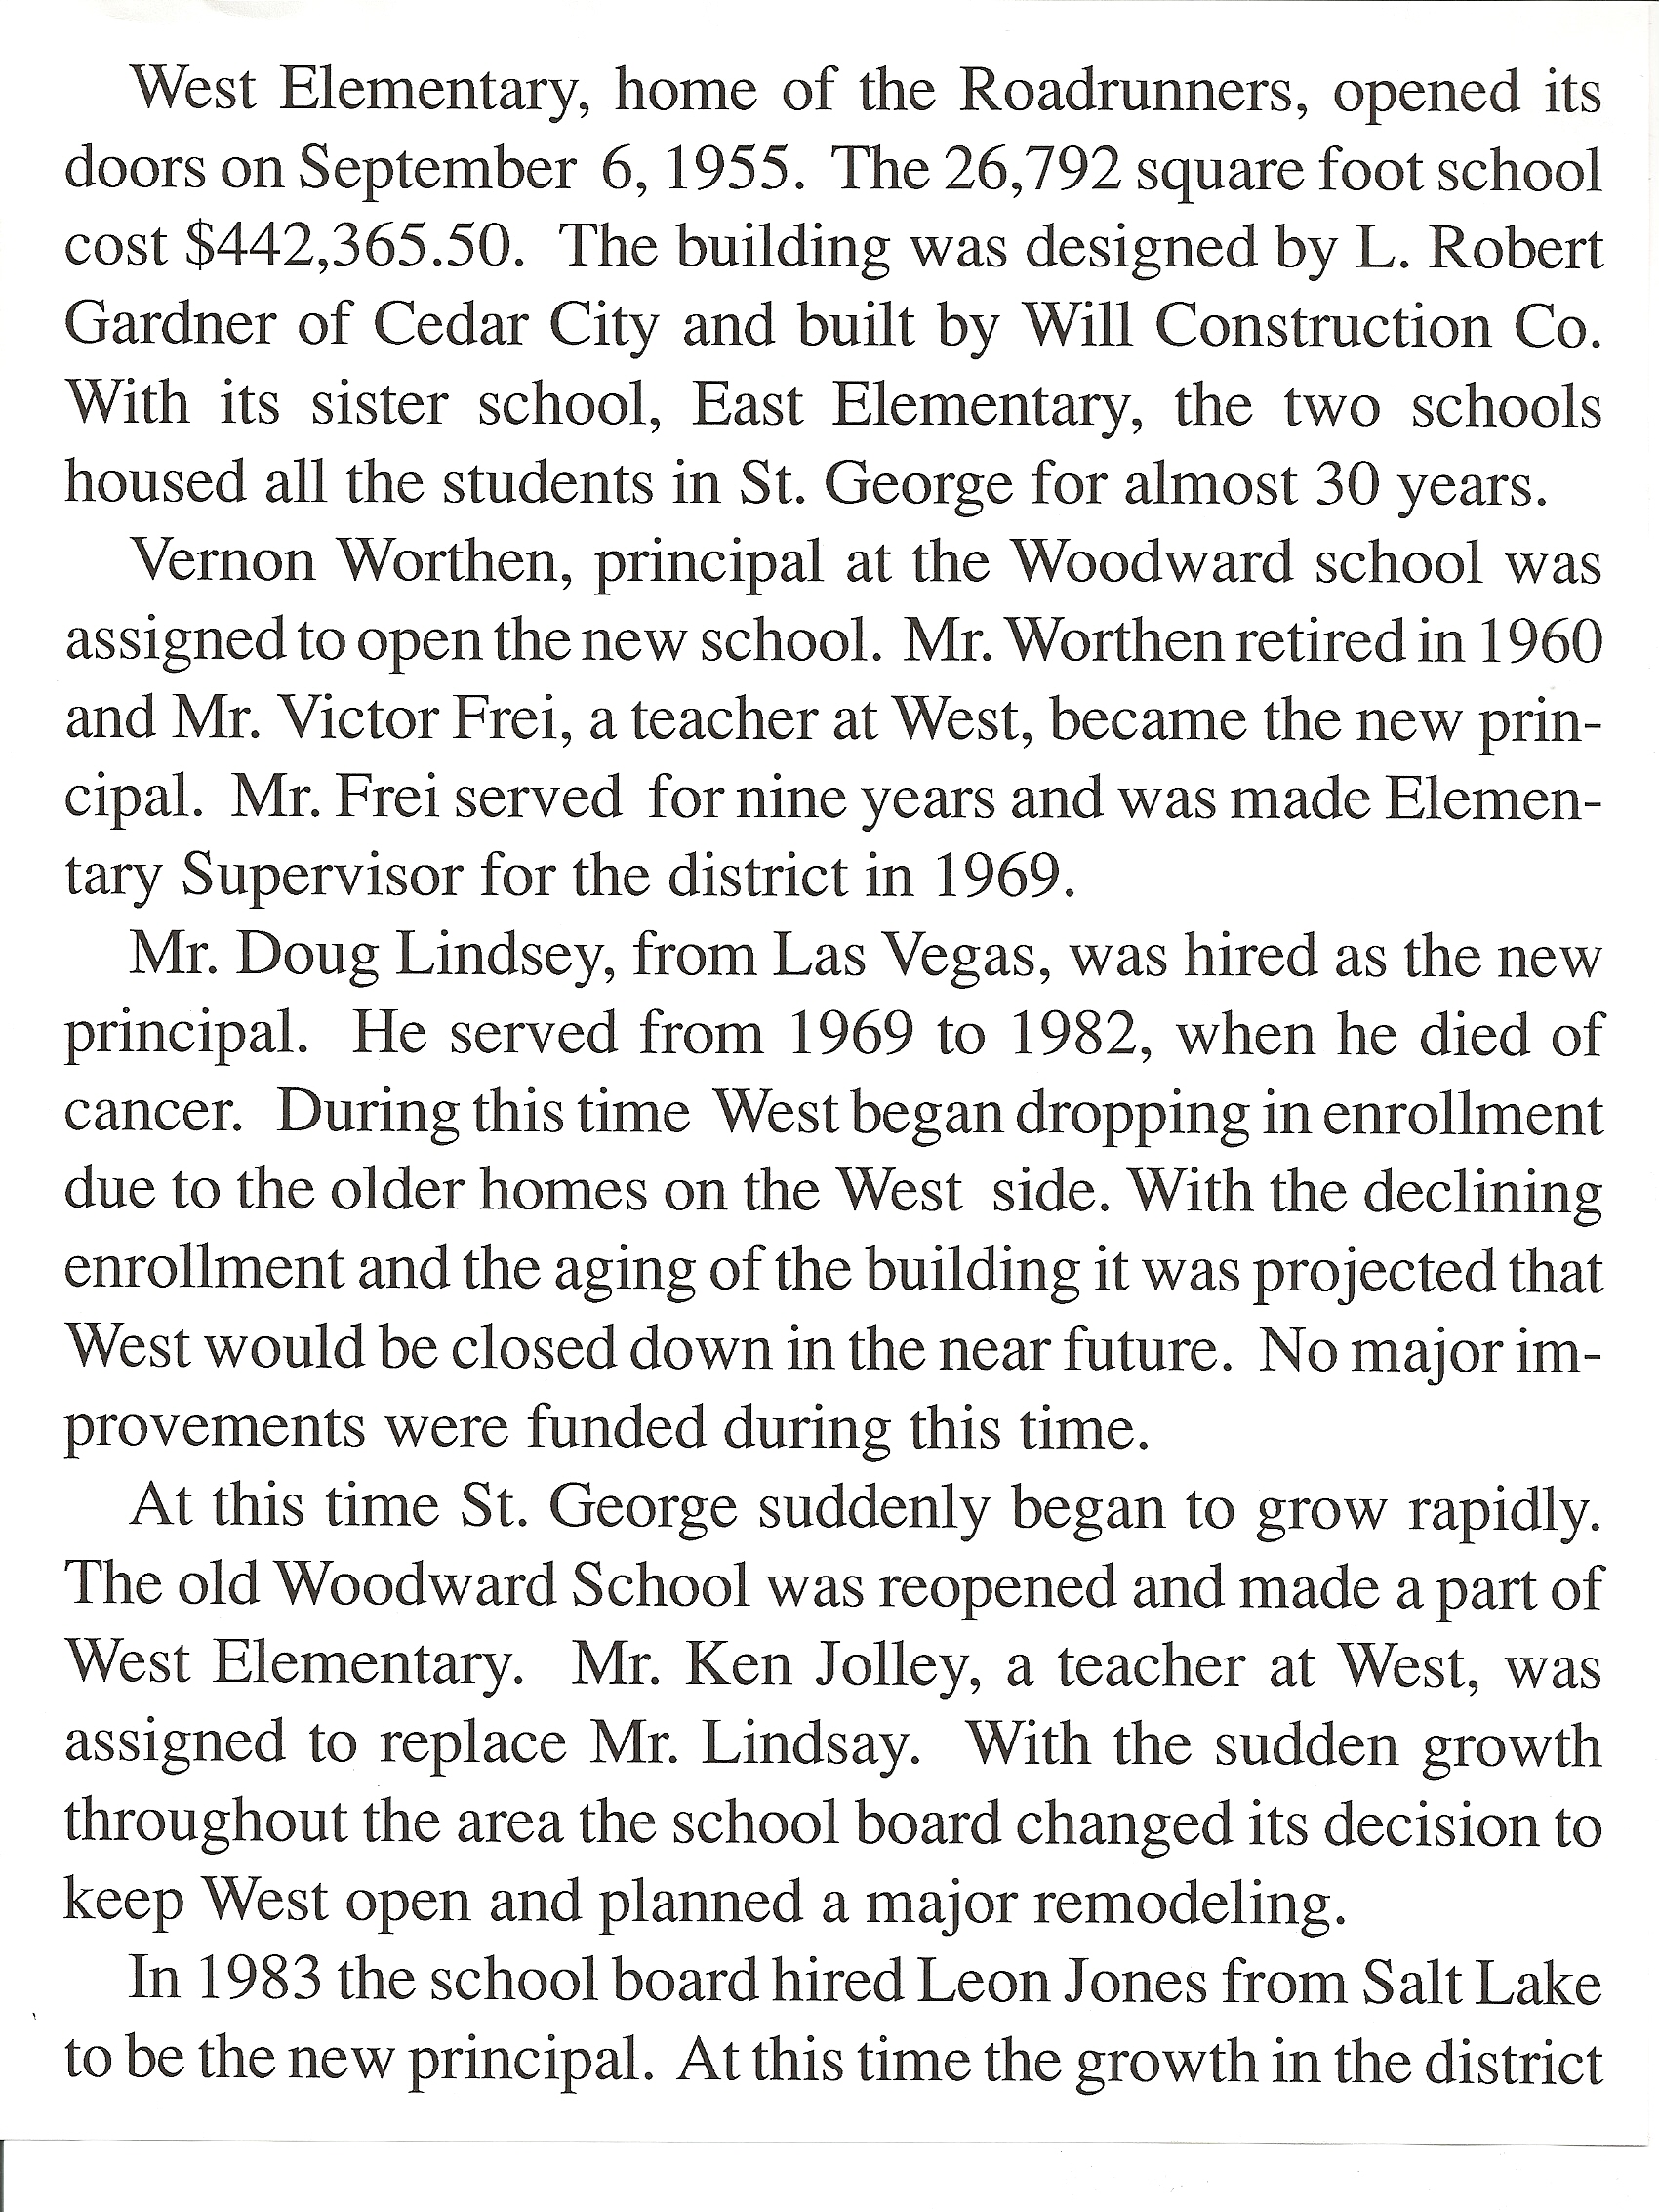 Page 2 of a brief history of West Elementary School